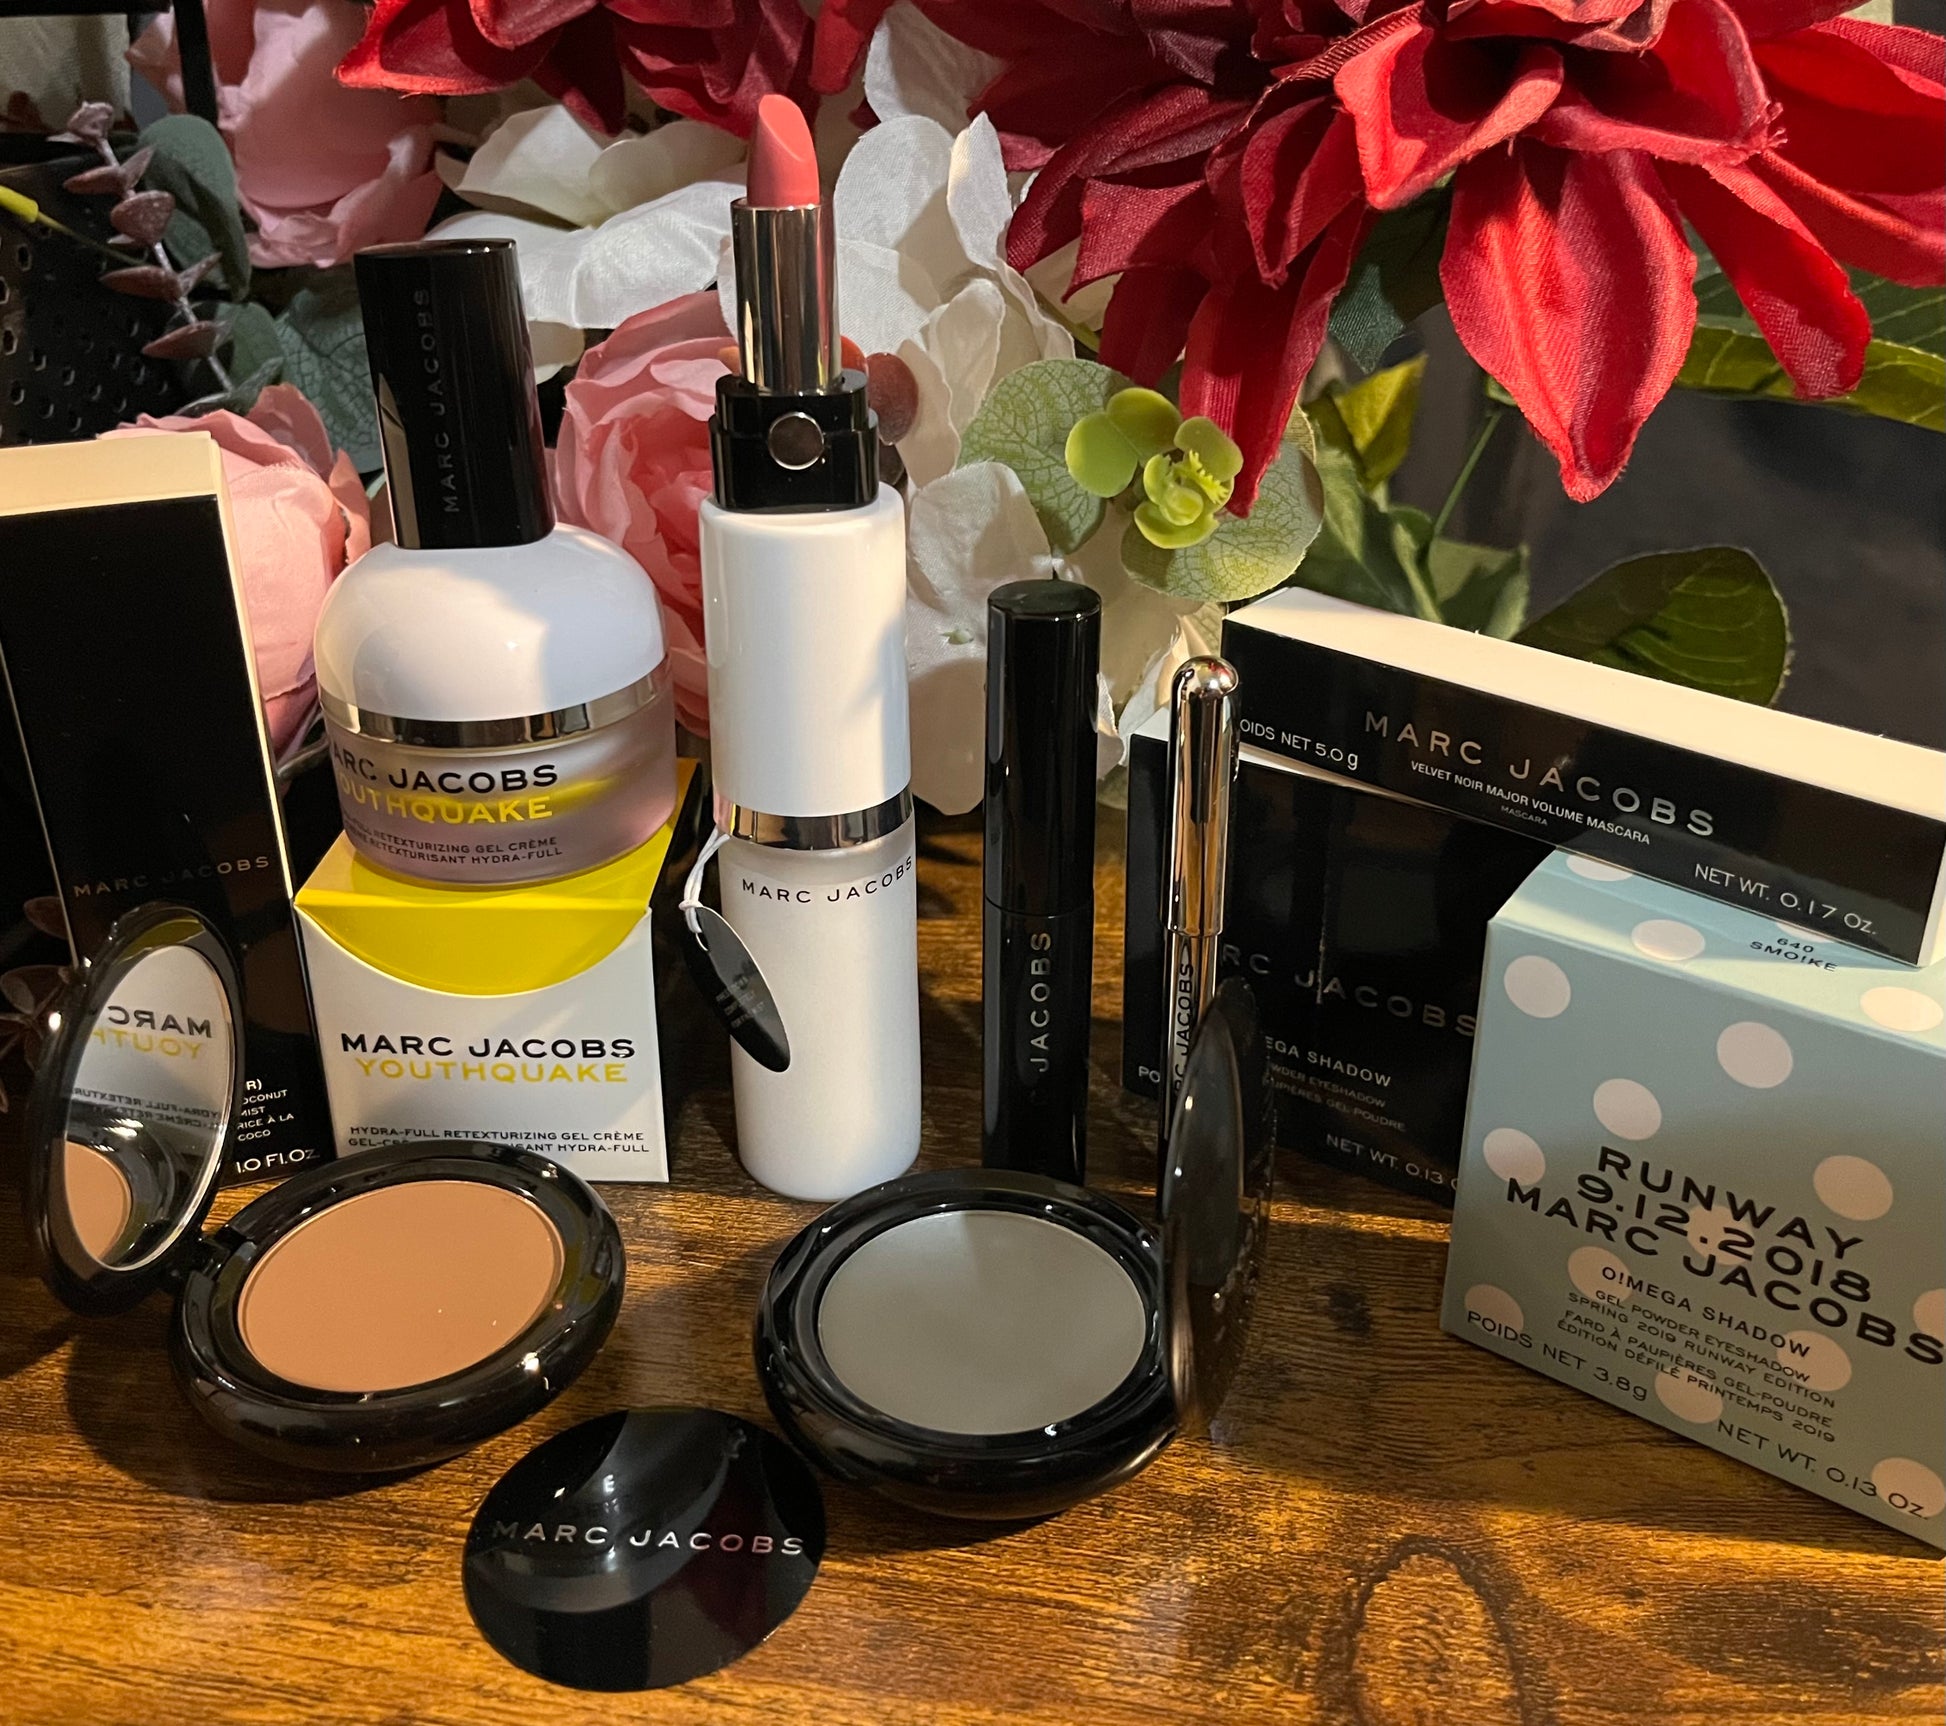 Elegant Marc Jacobs beauty collection featuring glossy compact powders, signature coconut setting spray, and assorted beauty cosmetics, complemented by a backdrop of lush pink & white florals.